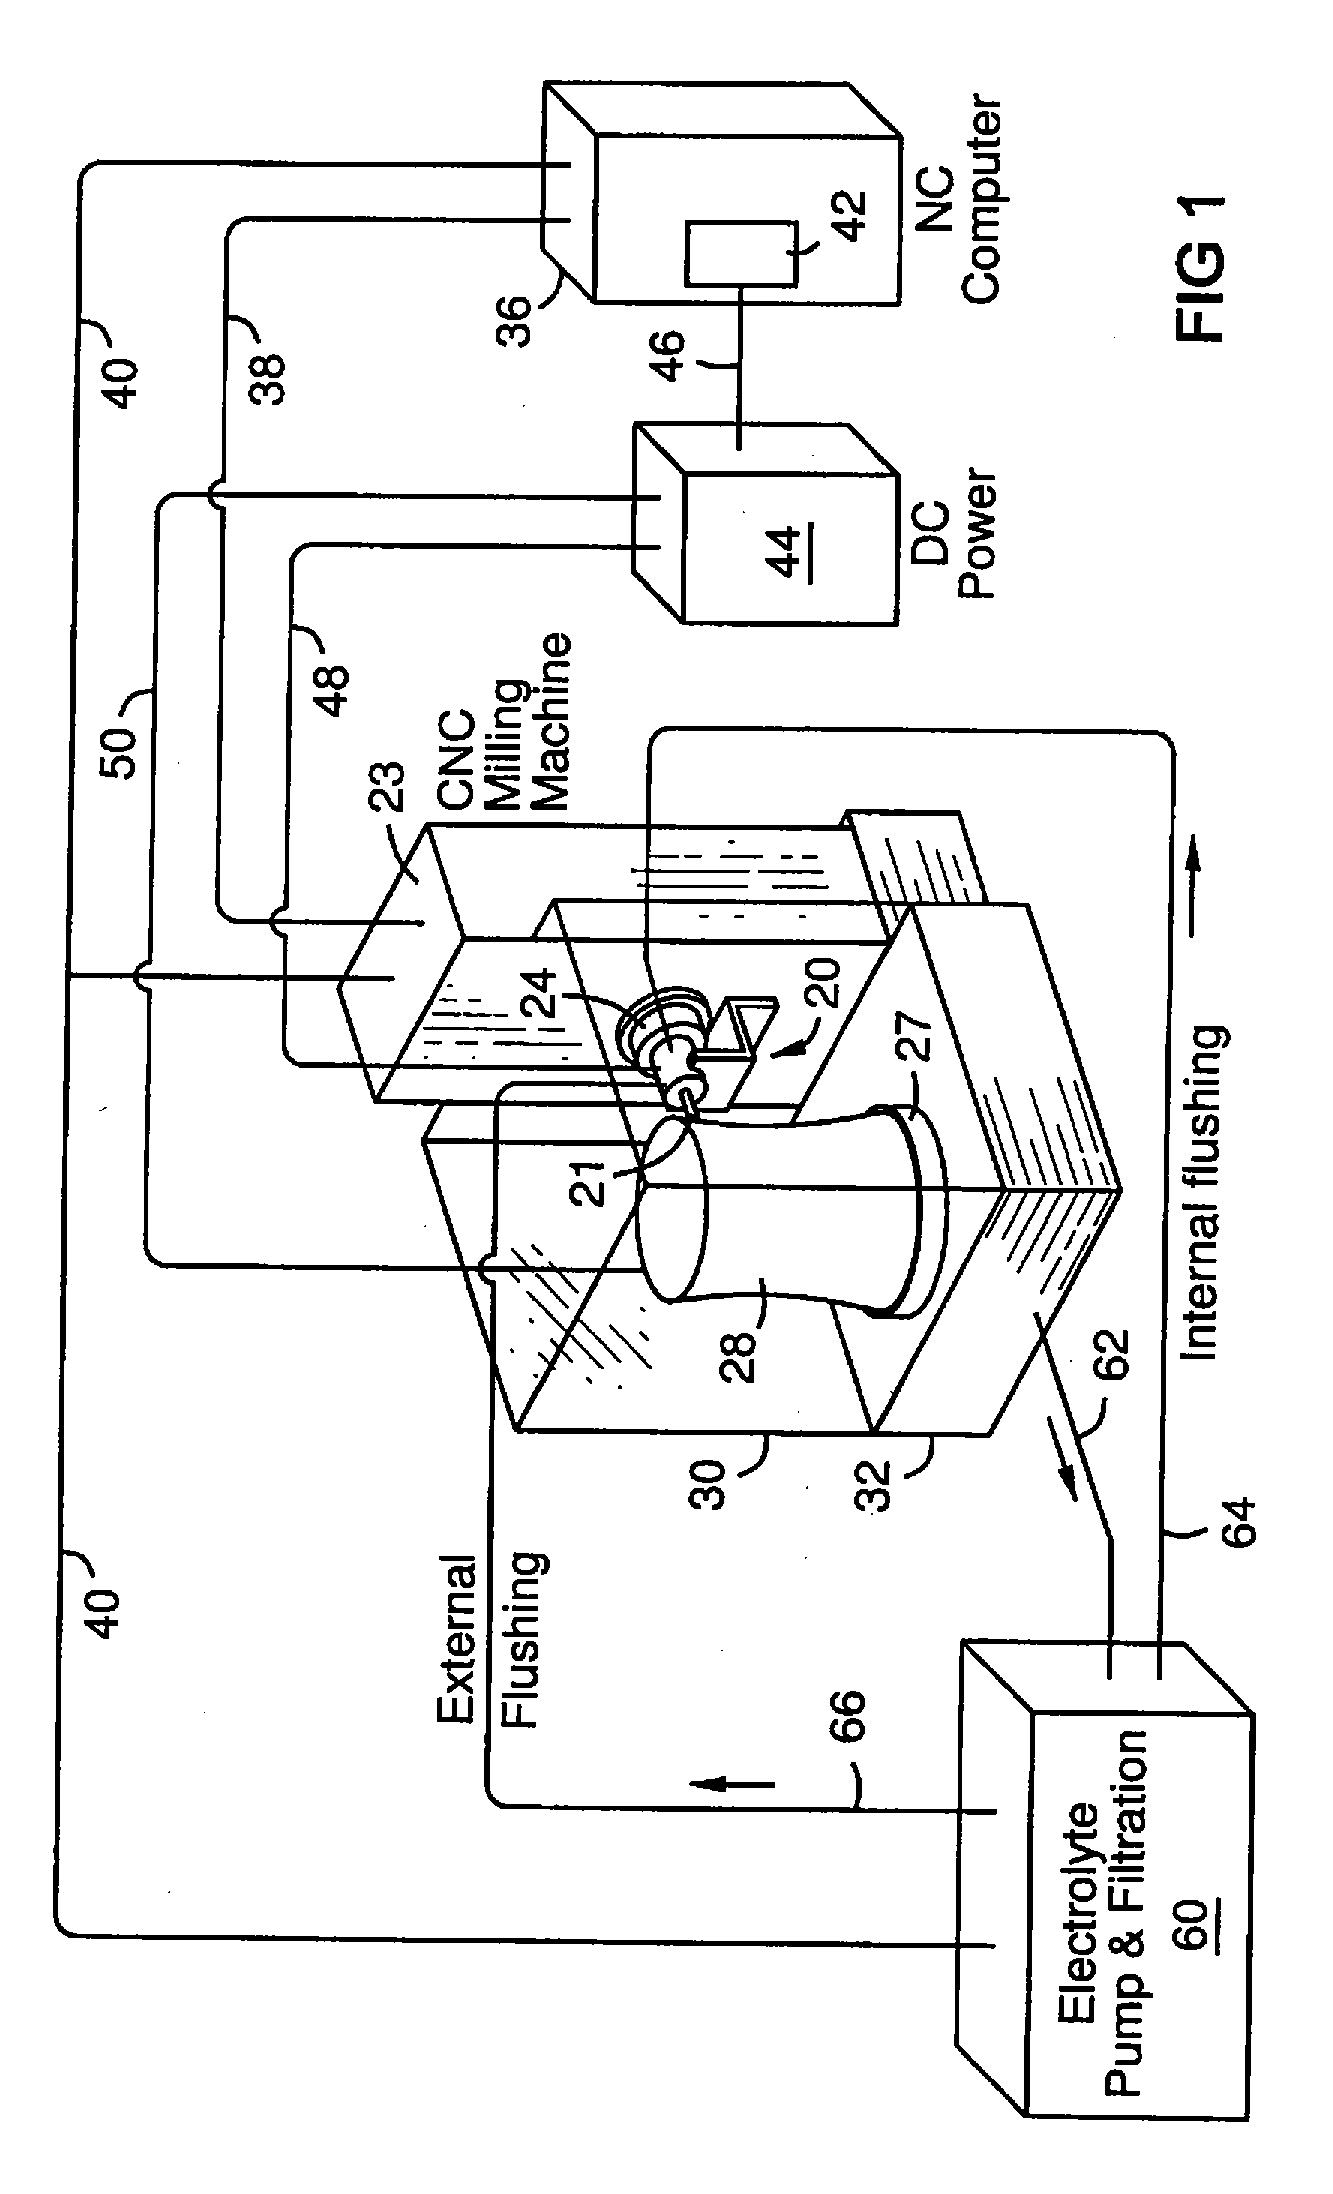 Adaptive Spindle Assembly For Electroerosion Machining On A CNC Machine Tool